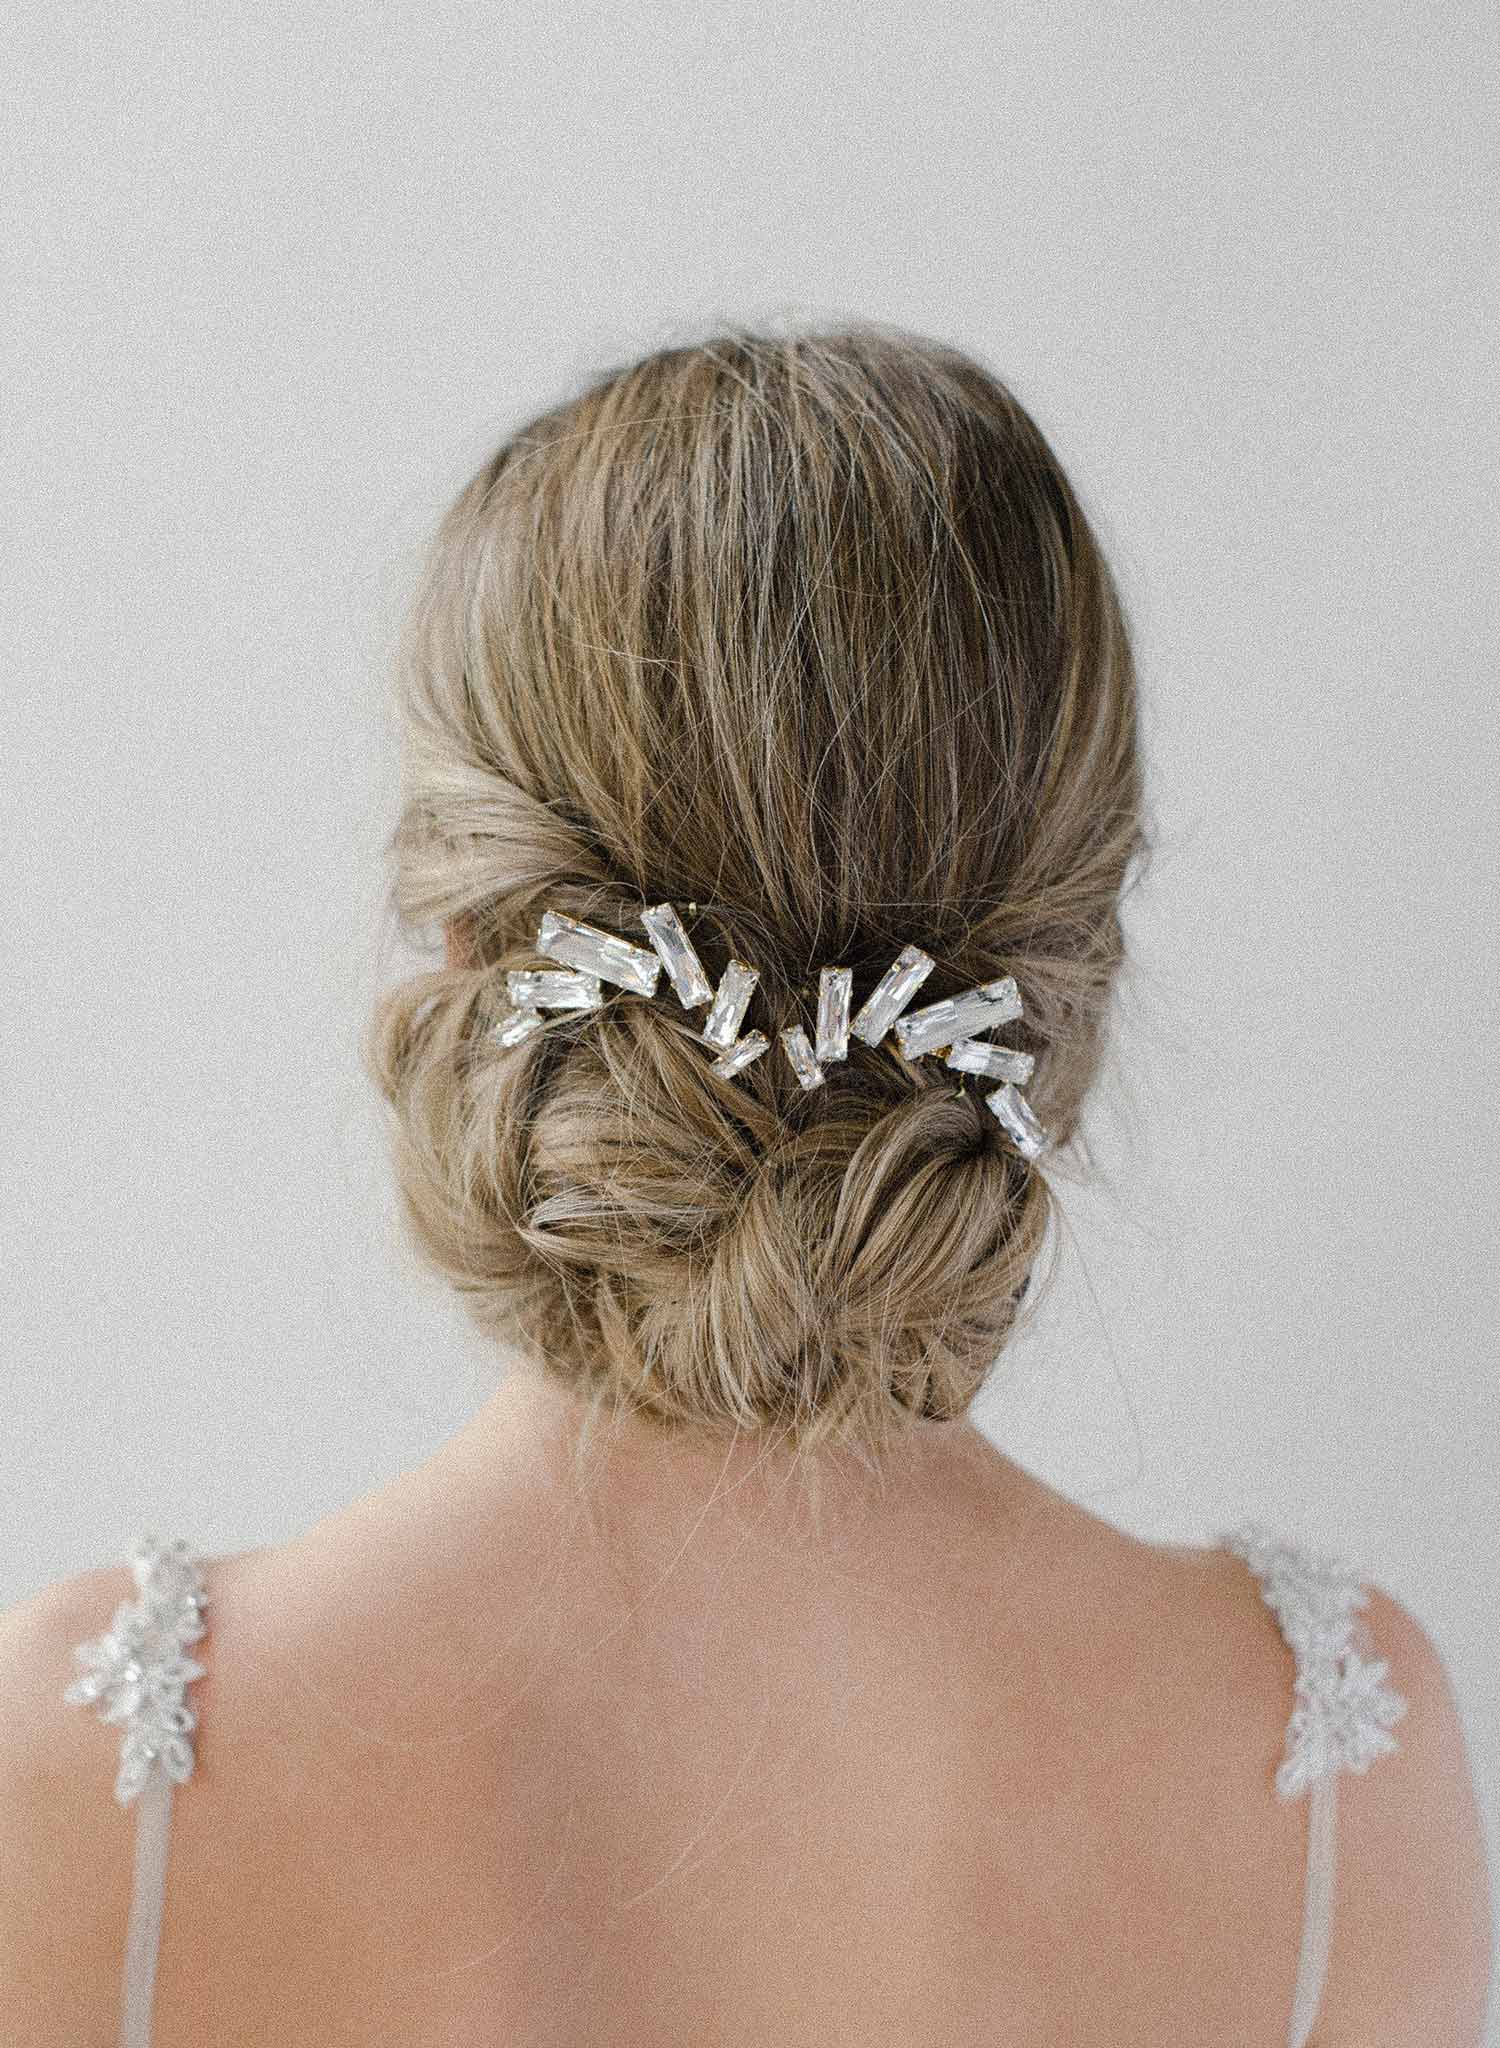 Confetti party hair comb set of 2 - Style #2021